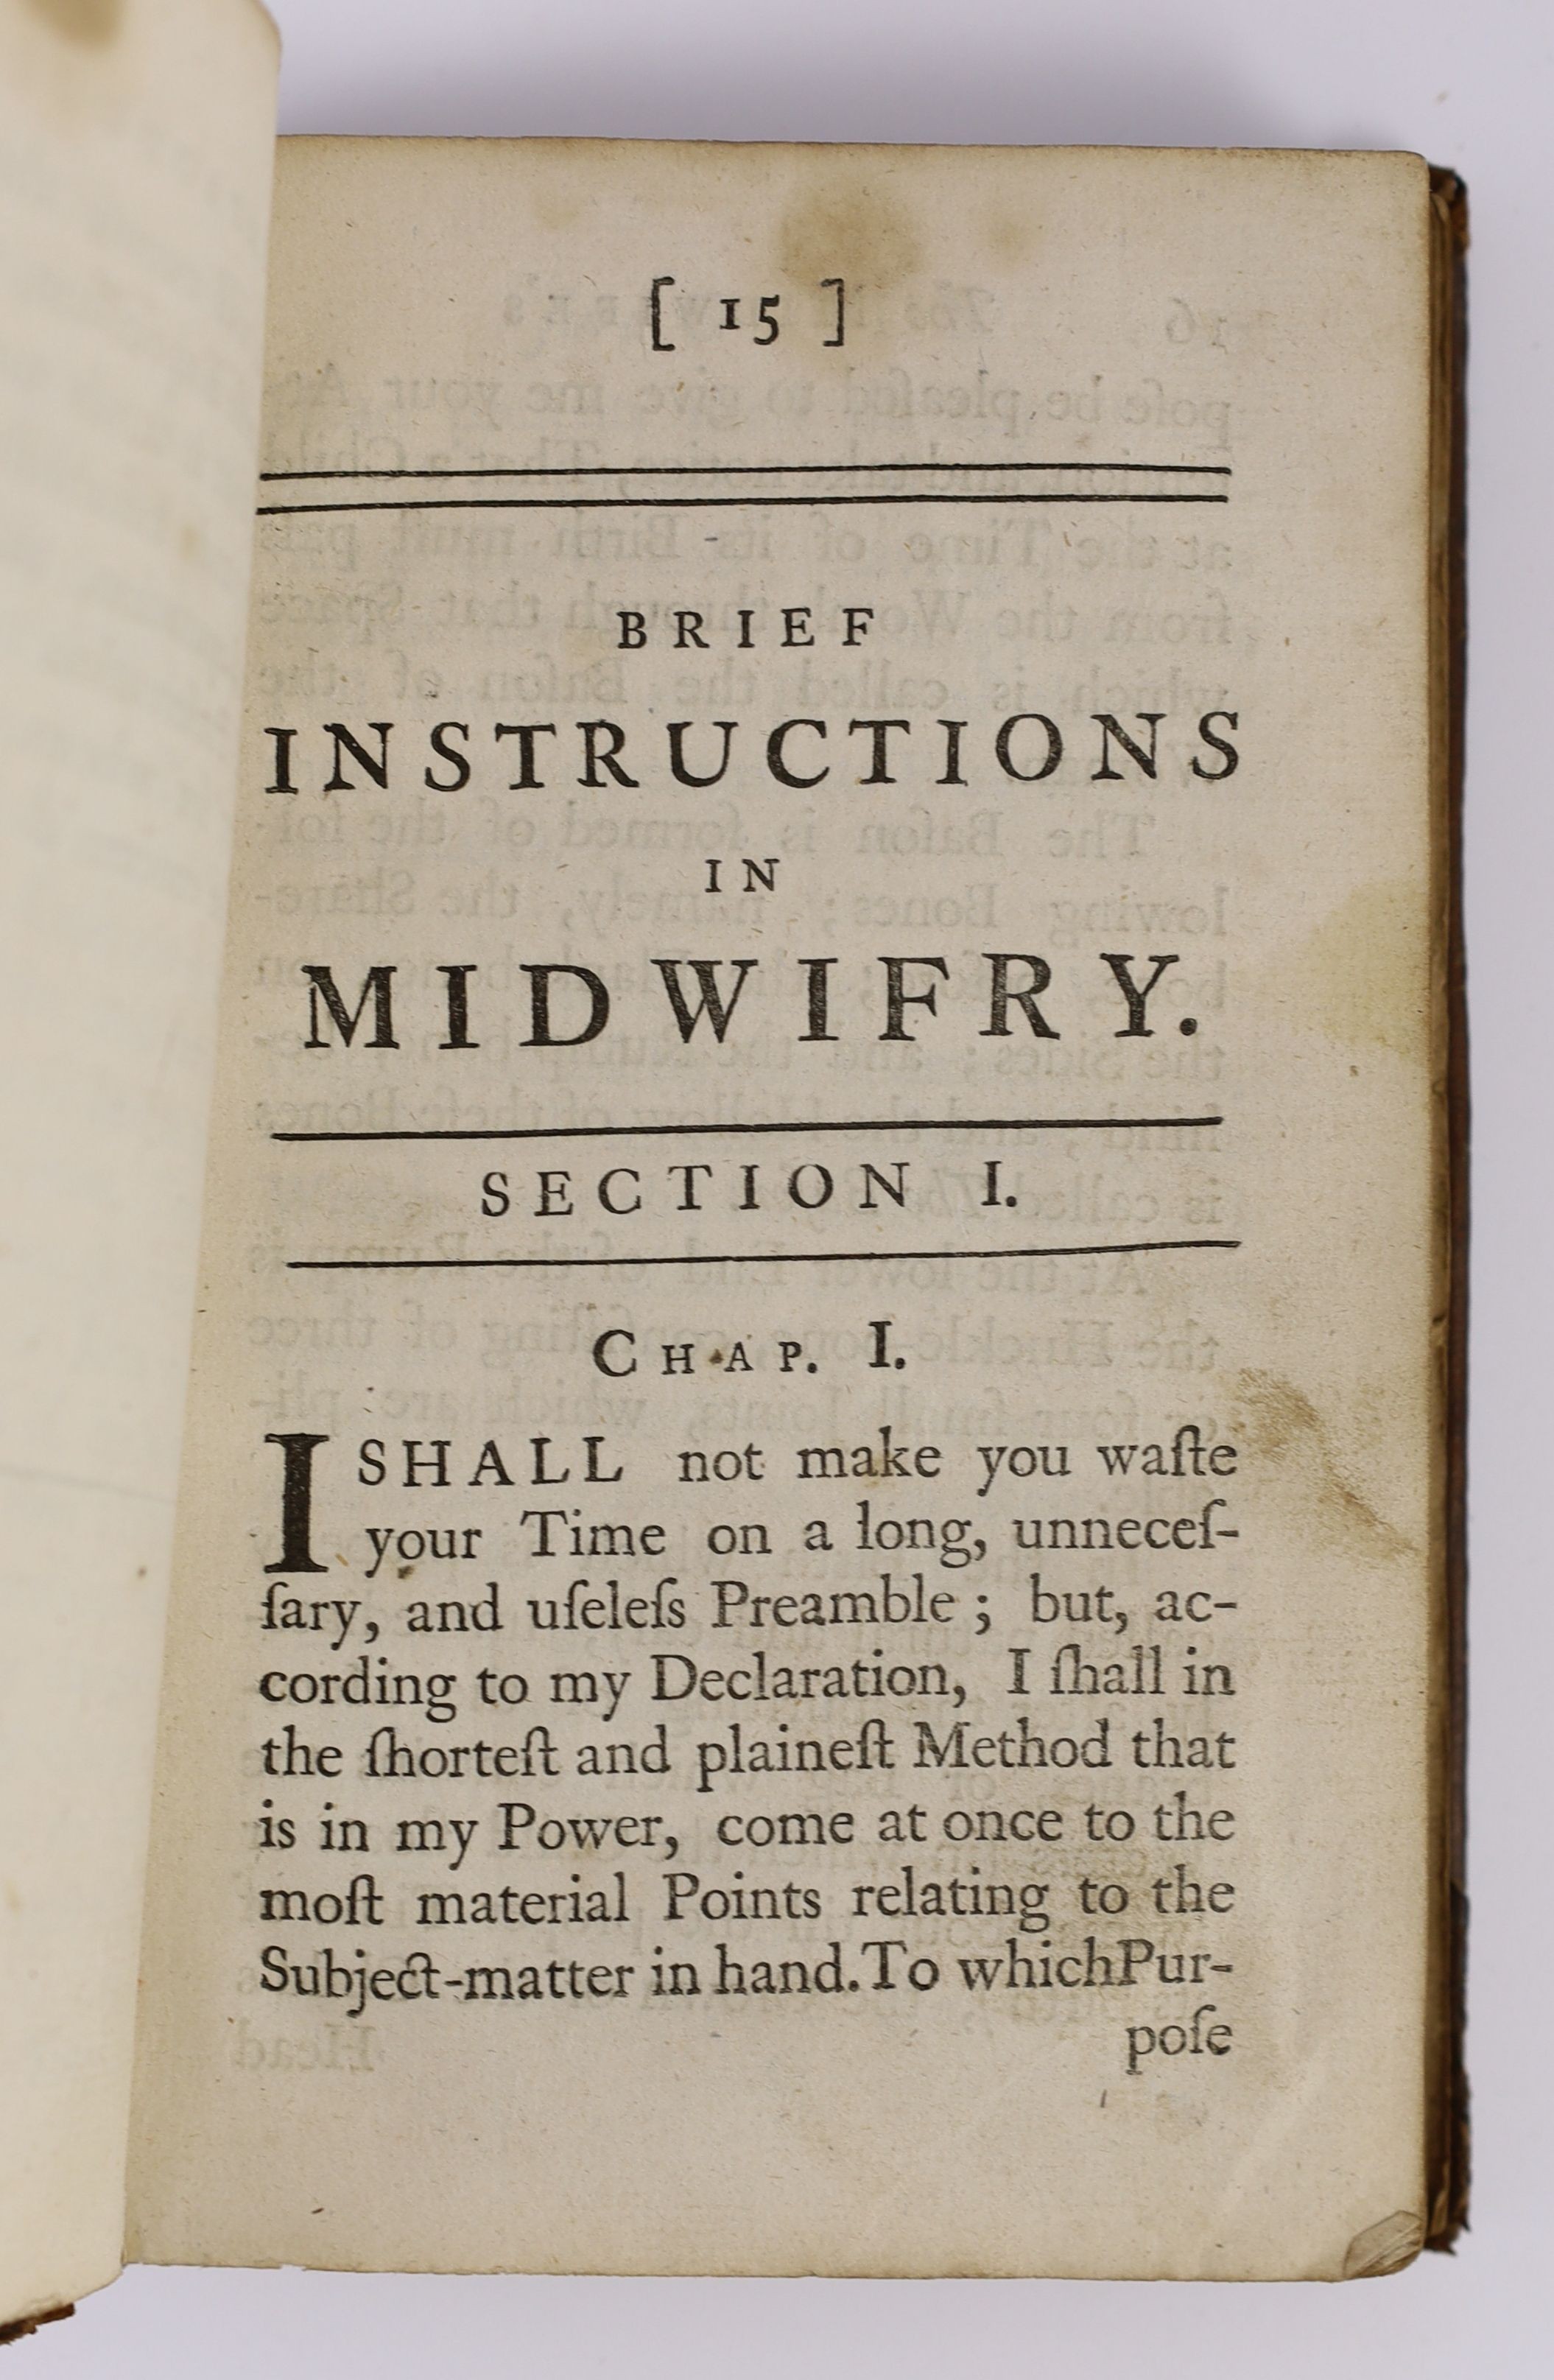 Counsell, George - The London New Art of Midwiry: or, the Midwife’s Sure Guide, 12mo, calf, with 2 engraved plates, W. Anderson, London, 175